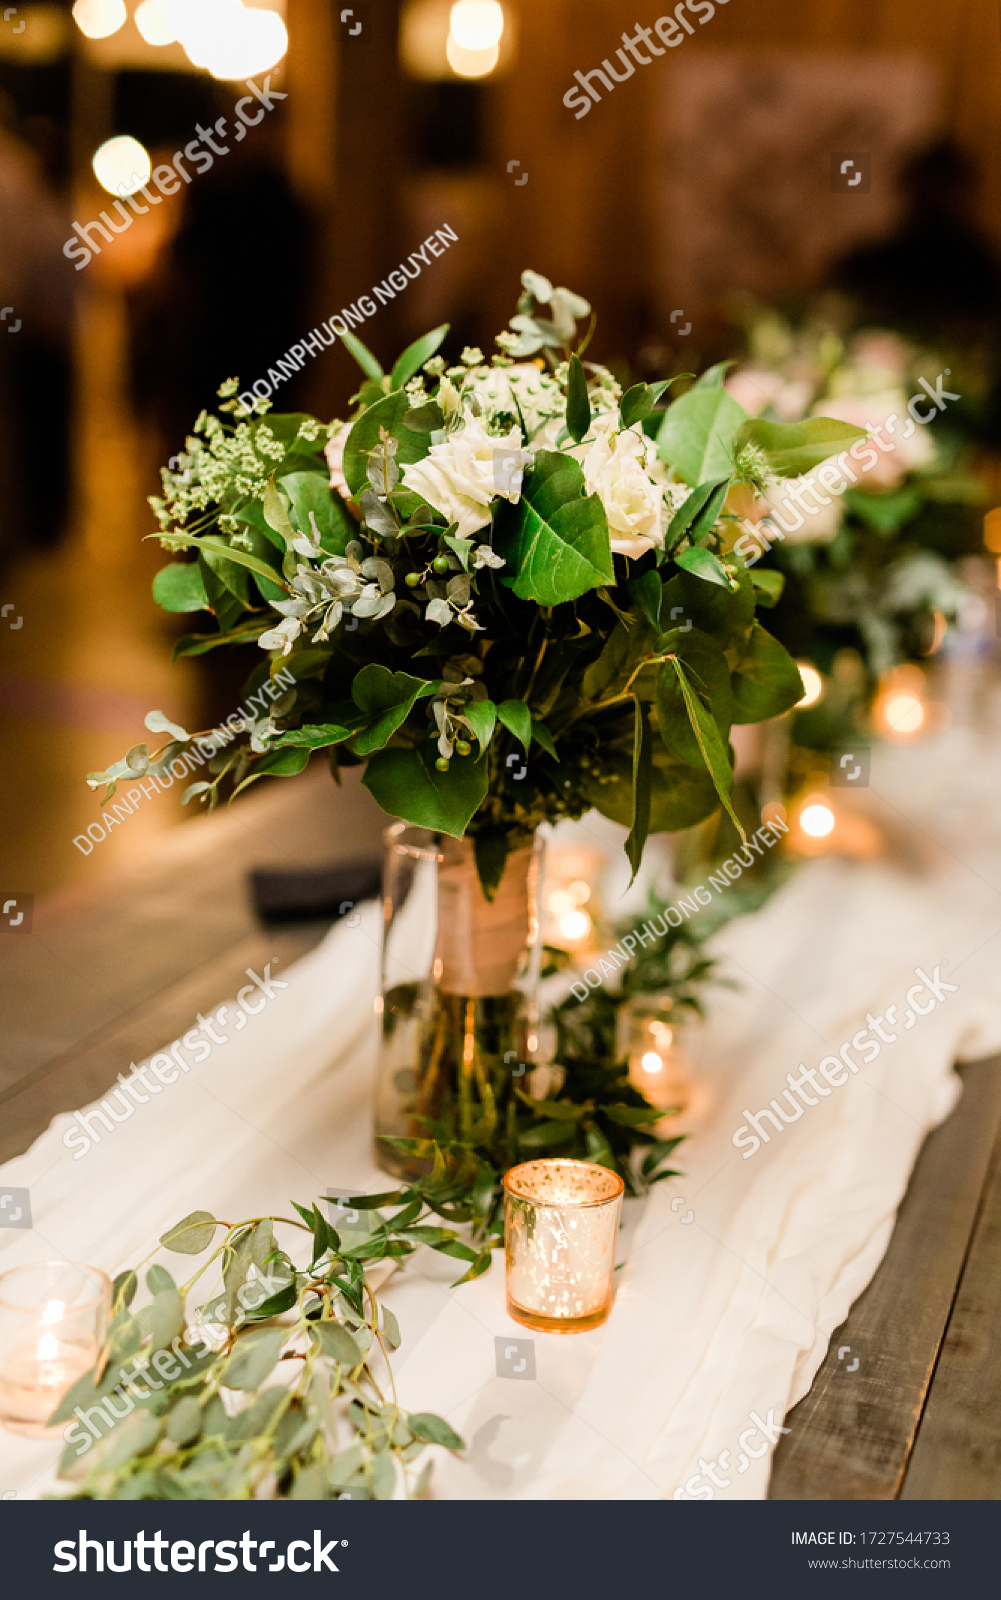 Bridal Bouquet with White Roses, Baby's Breath and Eucalyptus Leaves in a Vase at the Head Table at a Wedding with Votive Candles and a White Cheesecloth on a Wood Table #1727544733